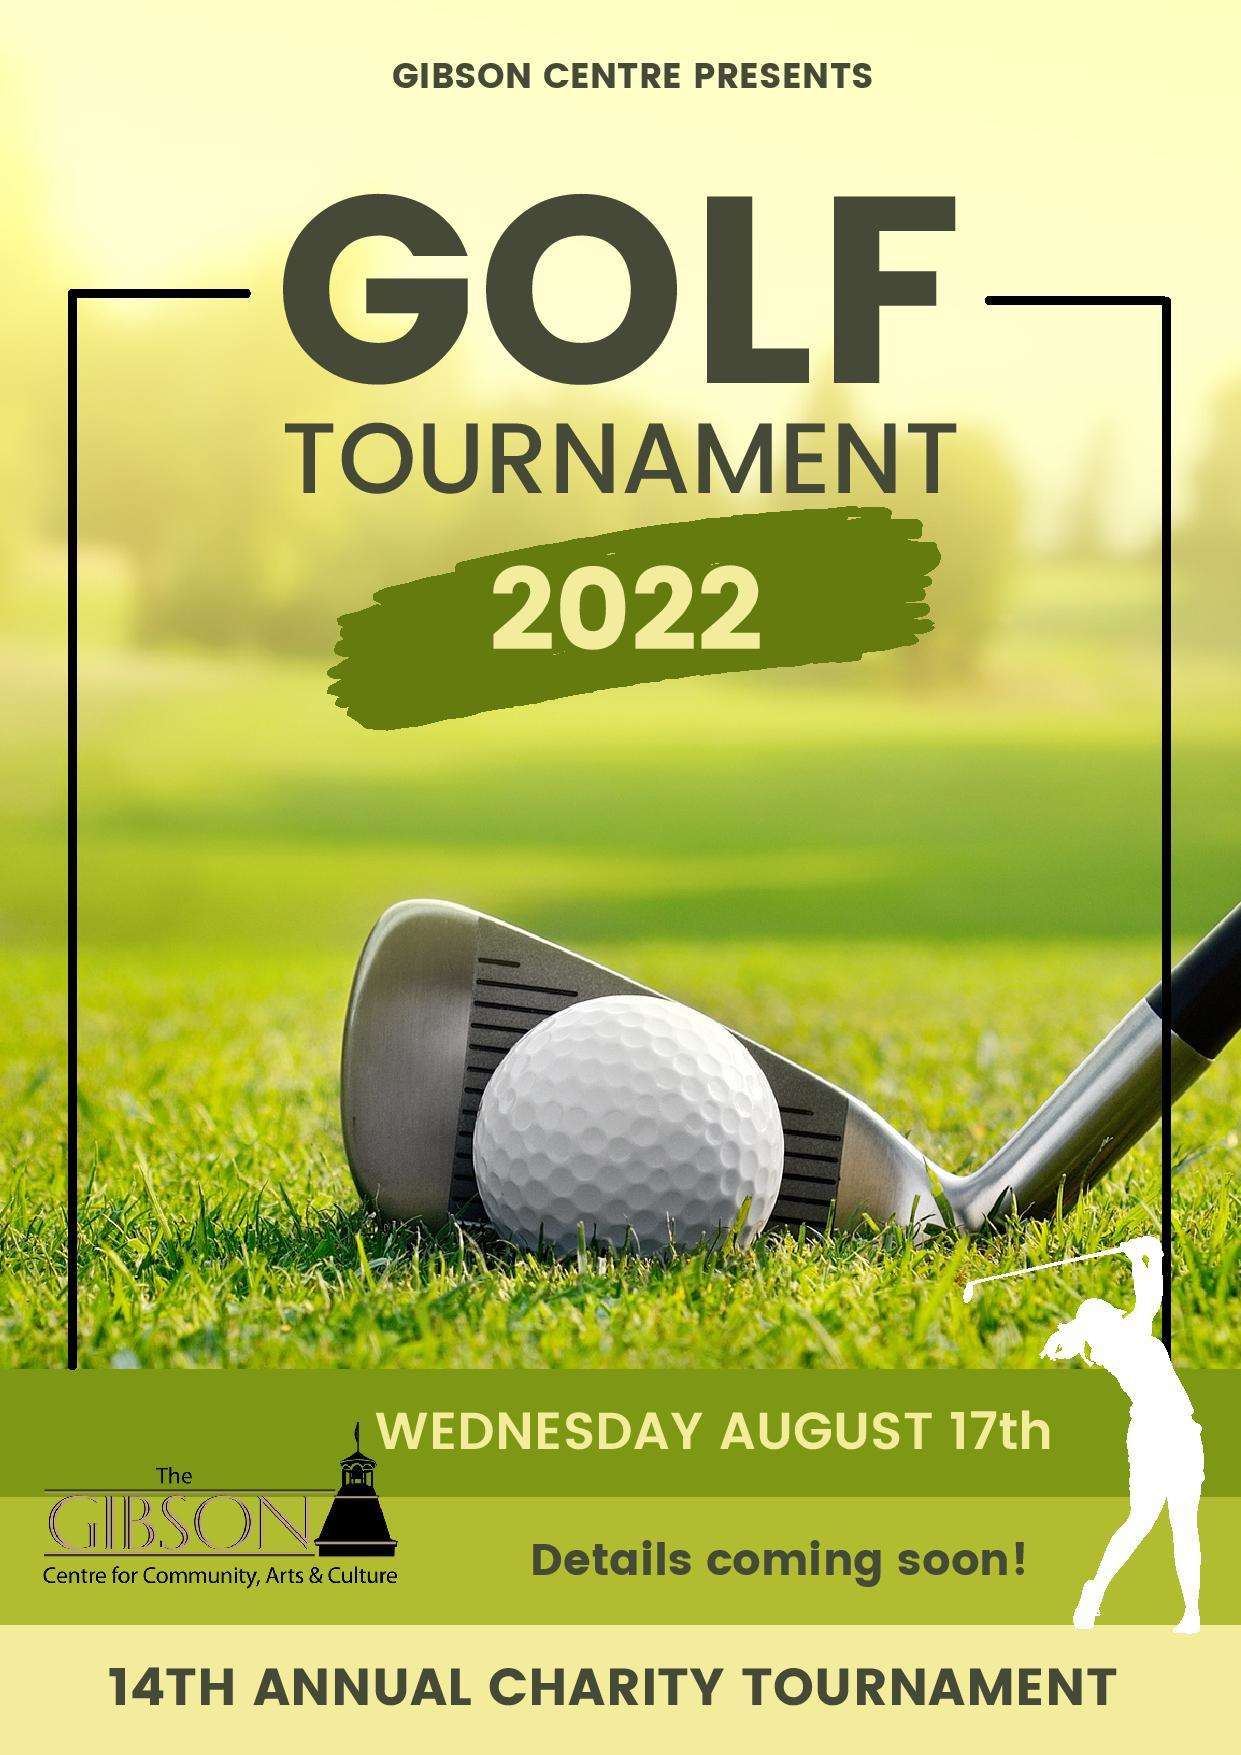 SAVE THE DATE! 14th Annual Charity Golf Tournament